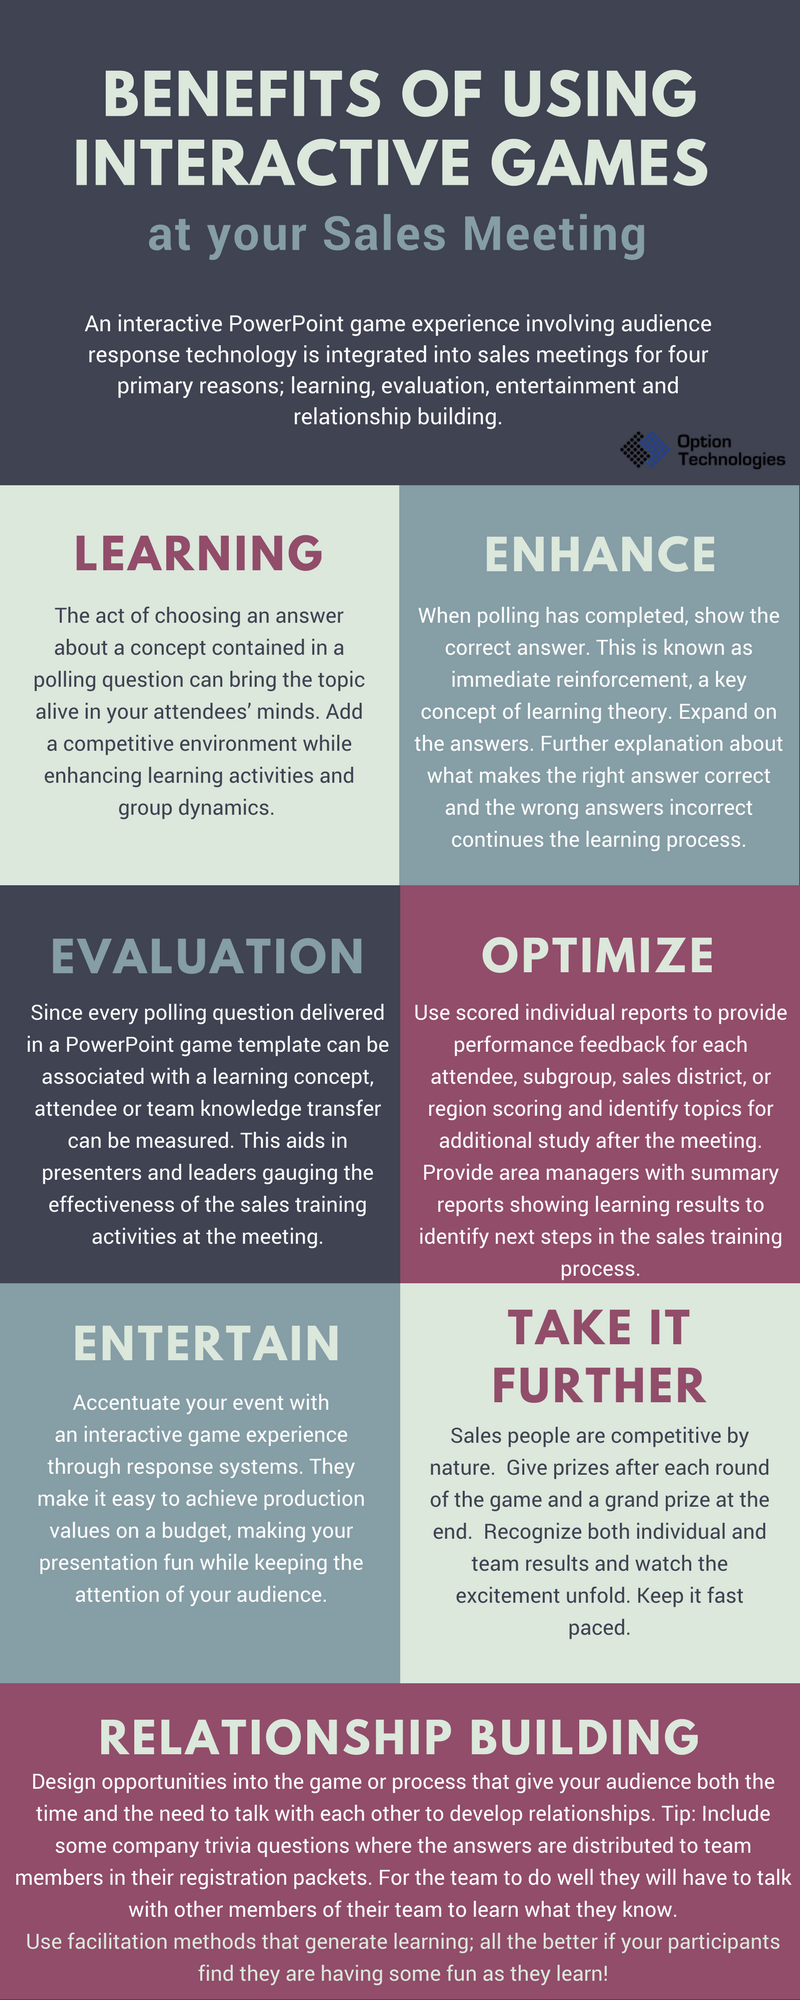 Benefits of Using Interactive Games at your Sales Meeting (infographic)